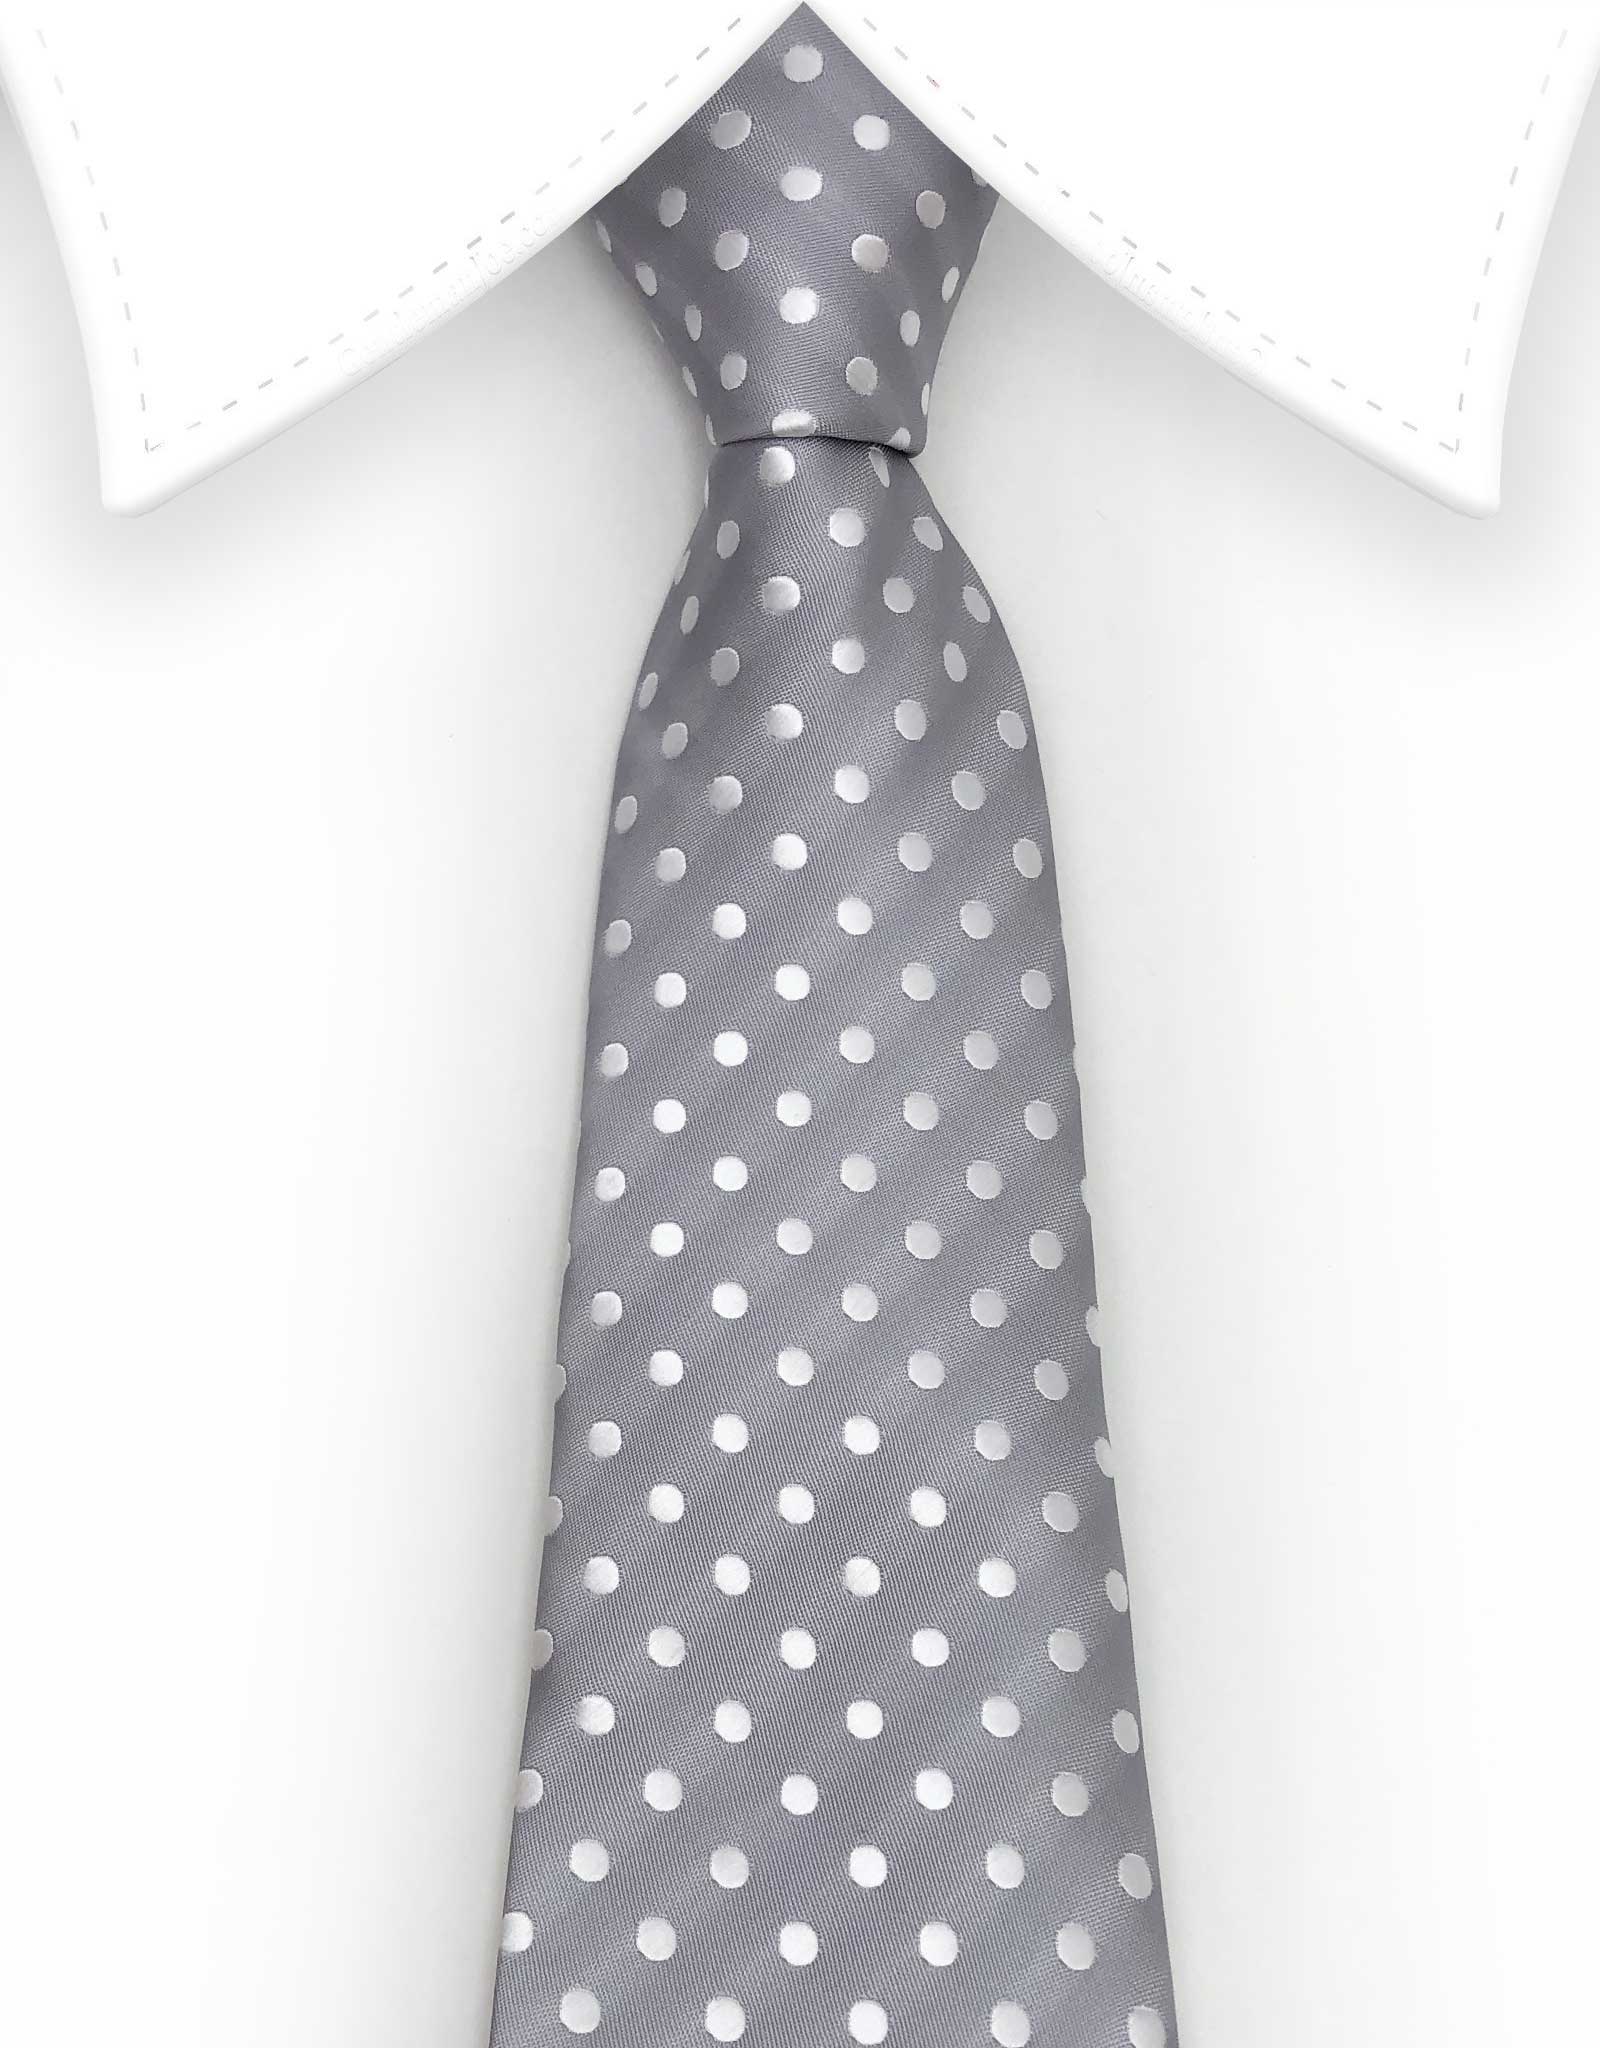 Elegant Silver Extra Large Tie with white polka dots